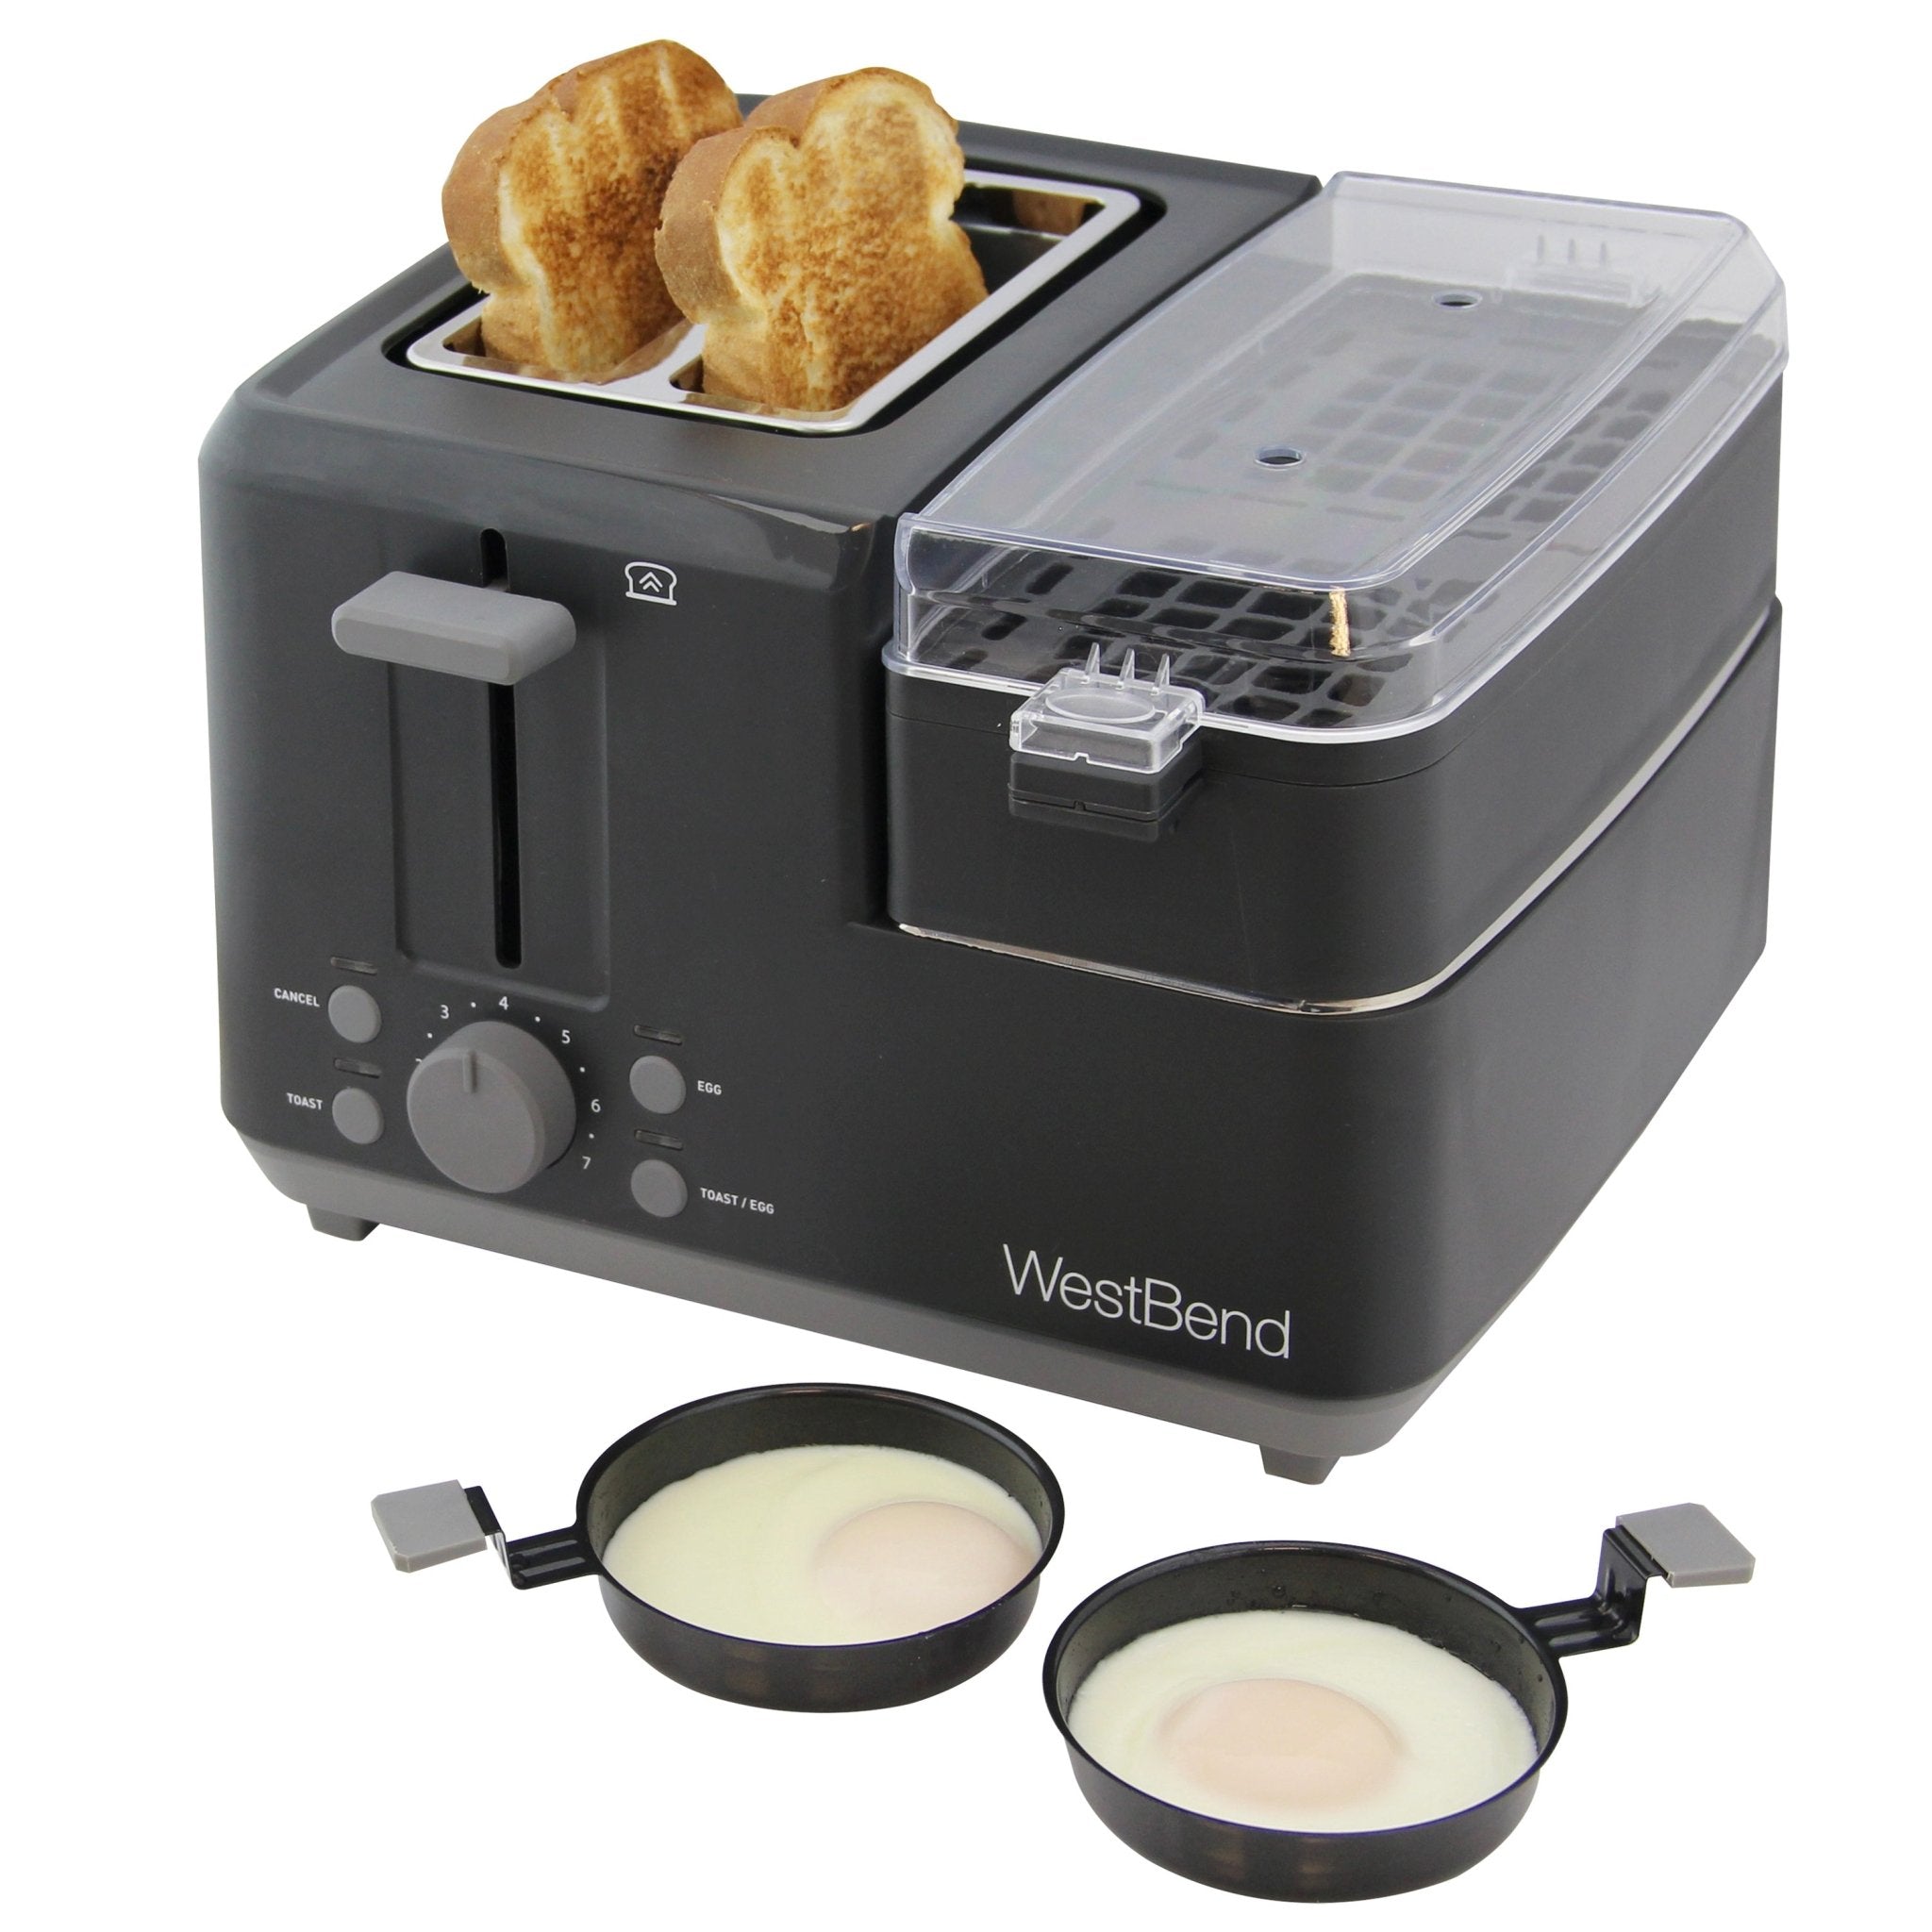 Honoen 5 in 1 Breakfast Station Center - Dual Breakfast Sandwich Maker, 2  Slice Toaster -Durable for Rolls, Bagels, English Muffins, Croissants and